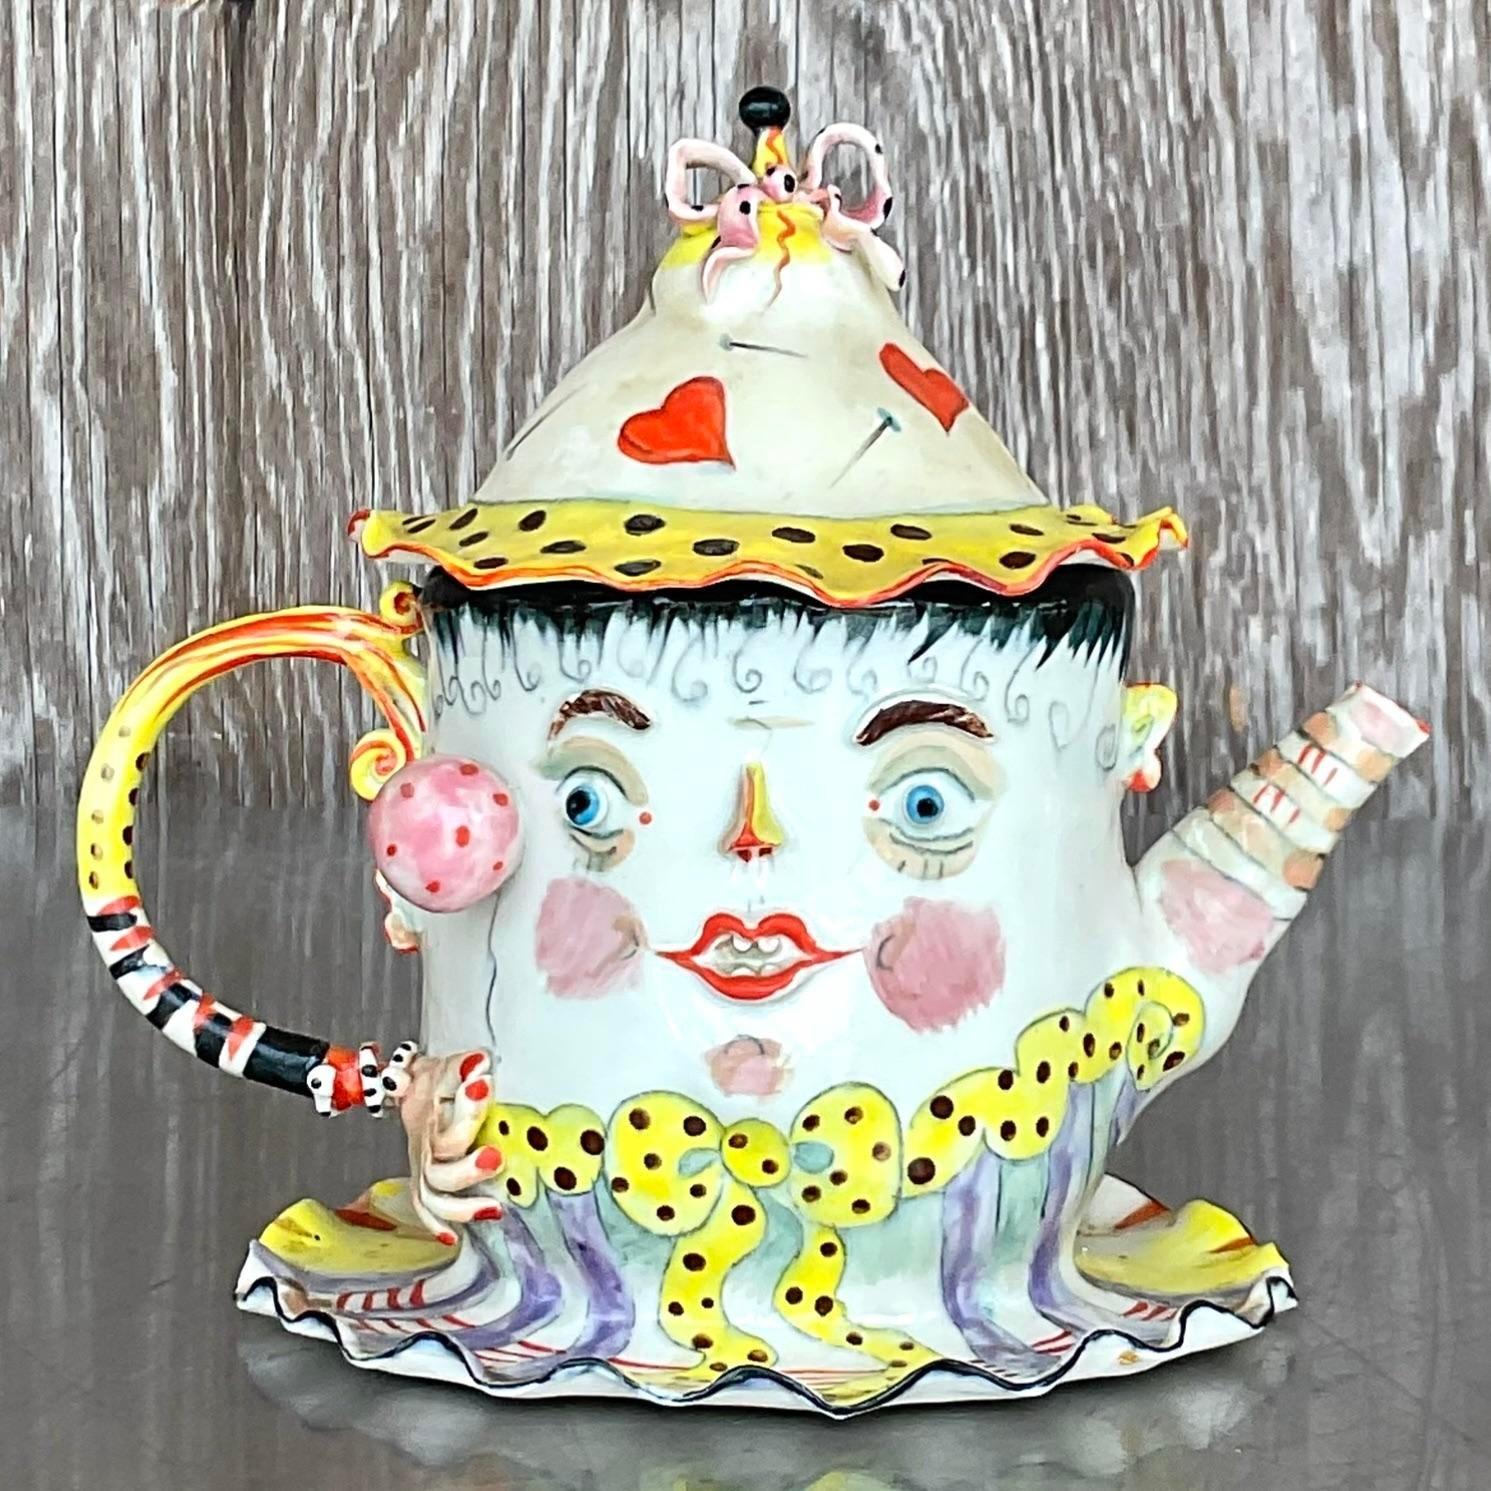 A stunning and unique vintage teapot with an arrangement of colors painted on its ceramic surface. Acquired at a Palm Beach estate.